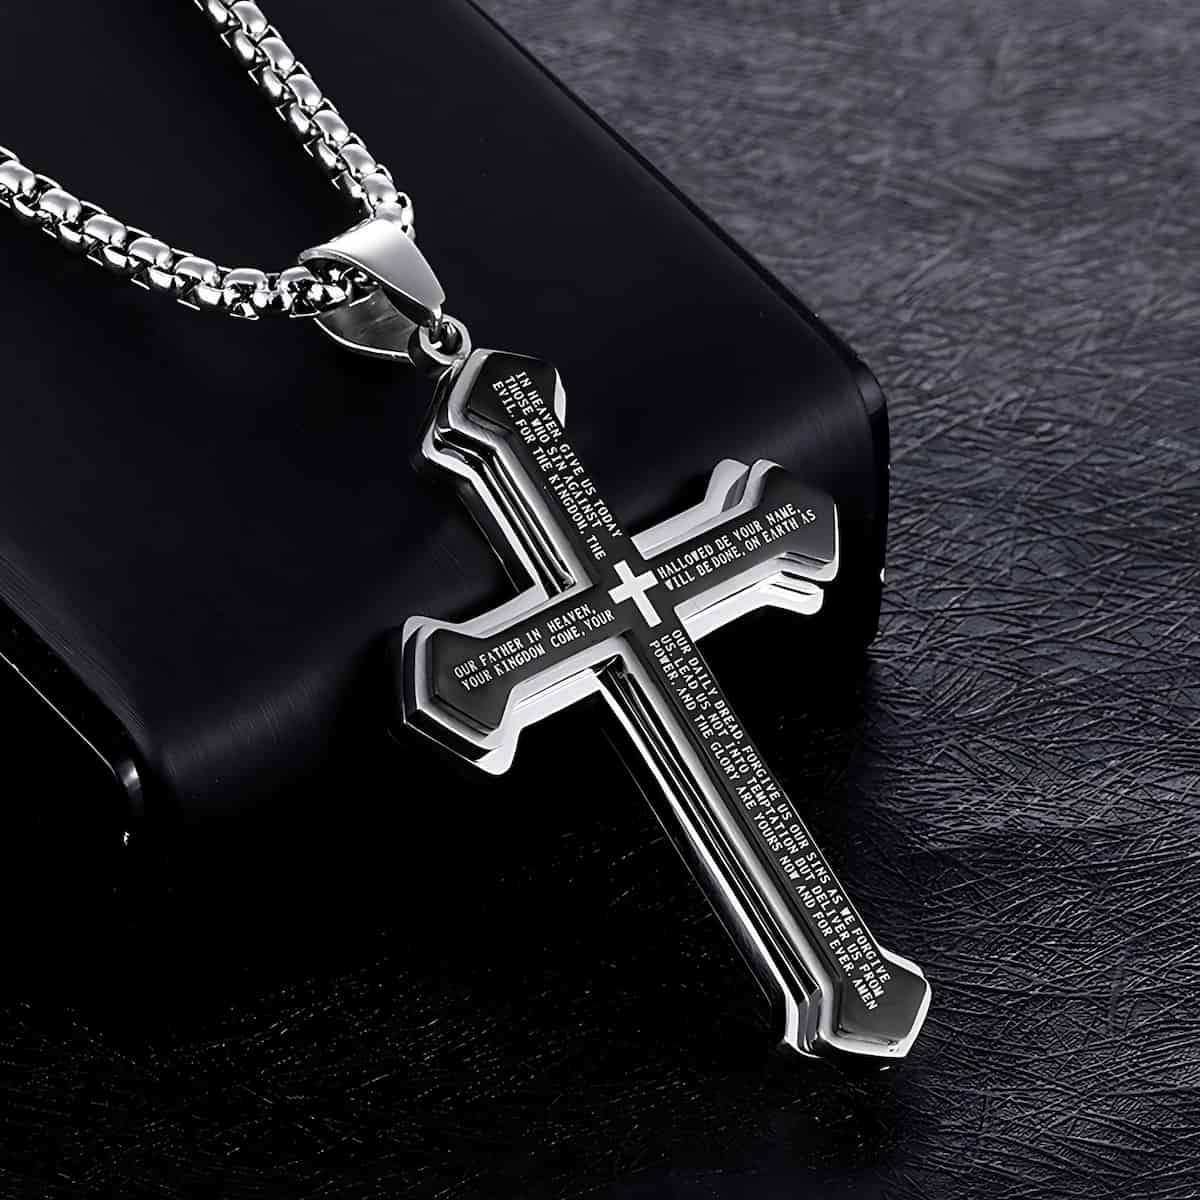 Cross Necklace with Bible Verse - Xenos Jewelry